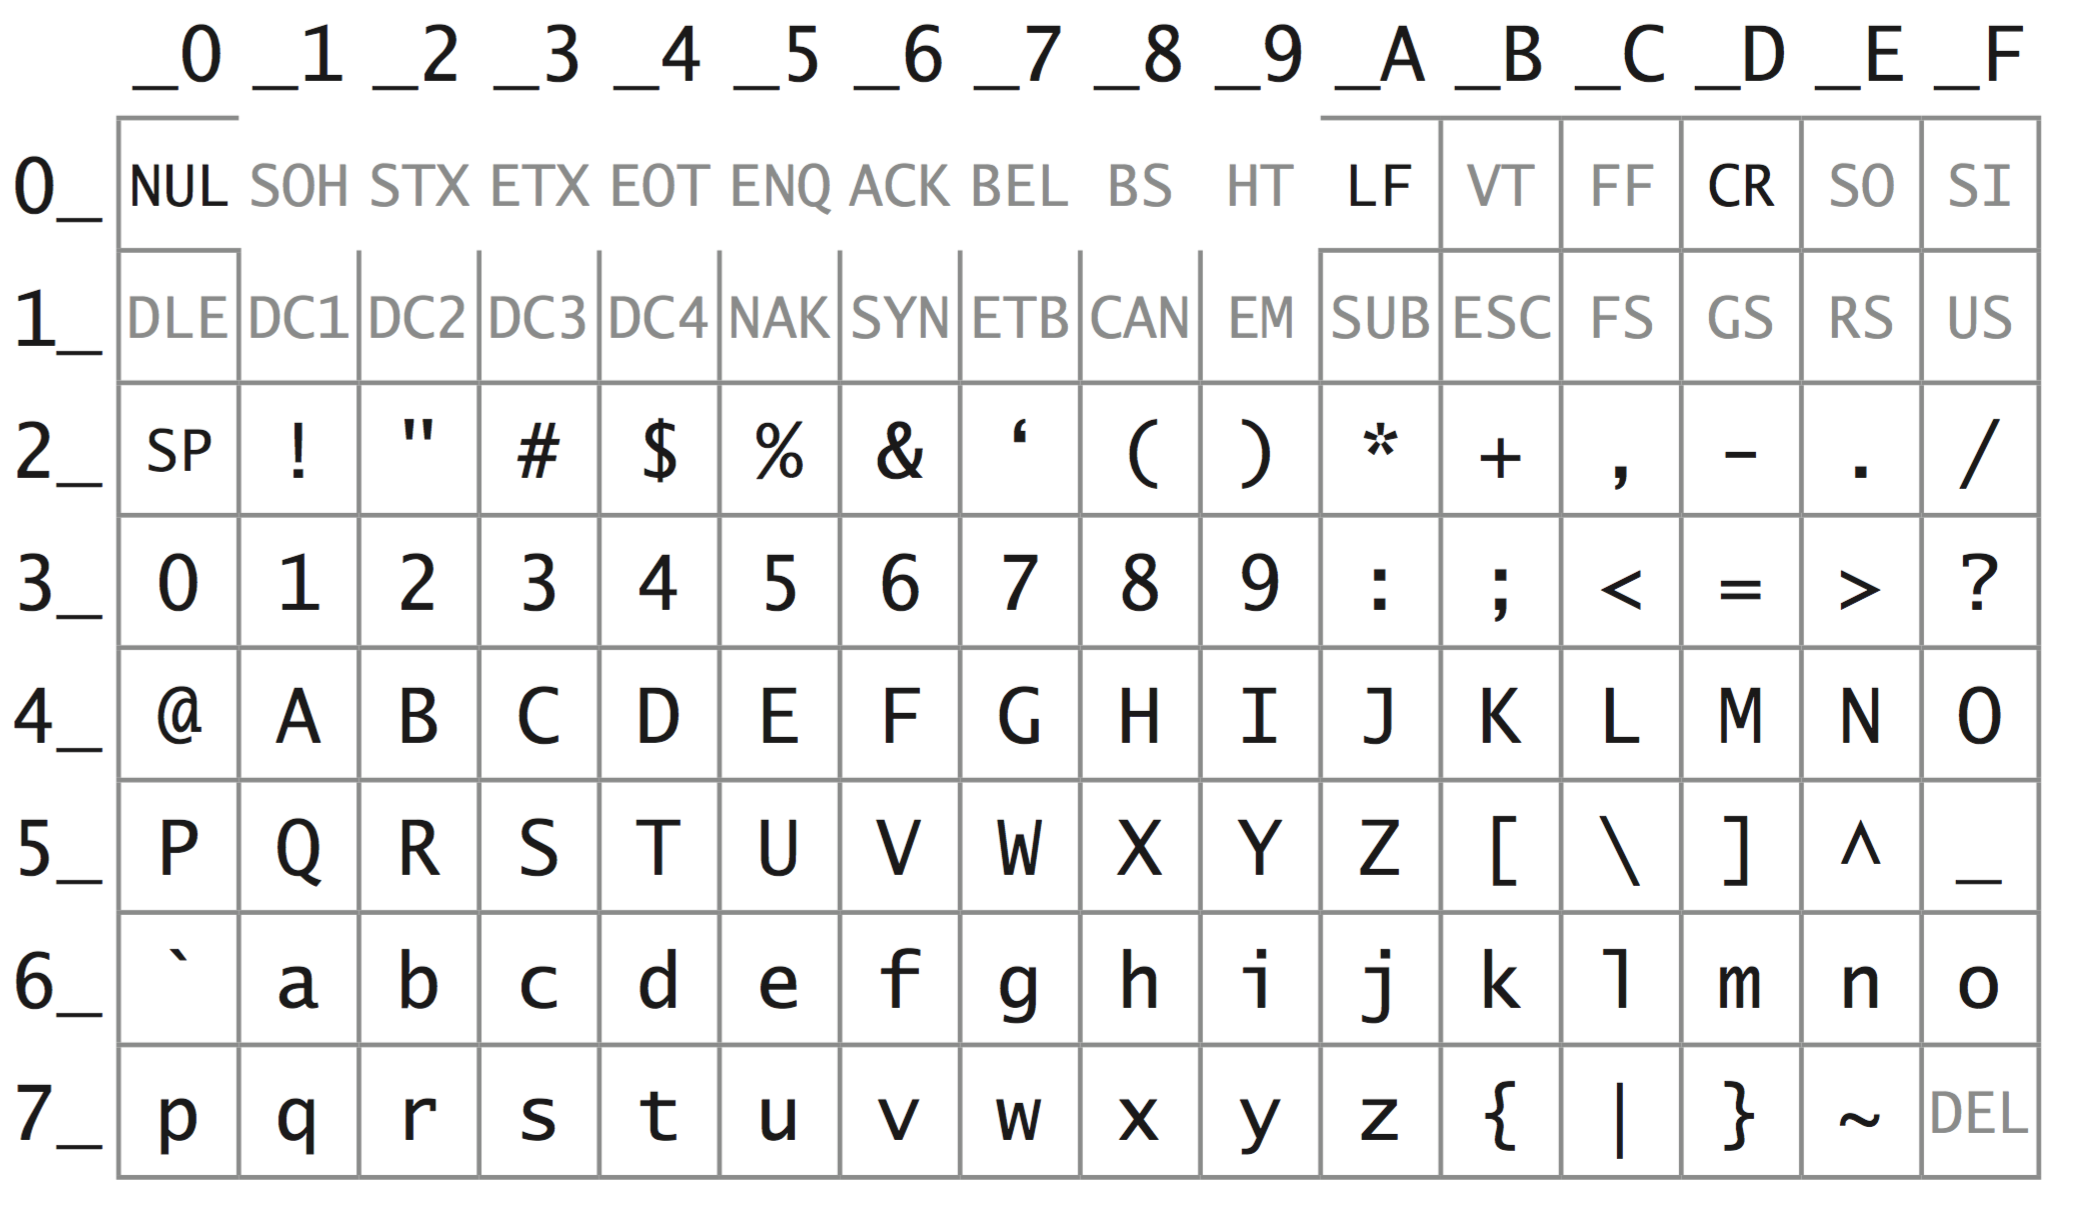 Ascii Numbering System Conversion From Hex To Ascii And Vice Versa